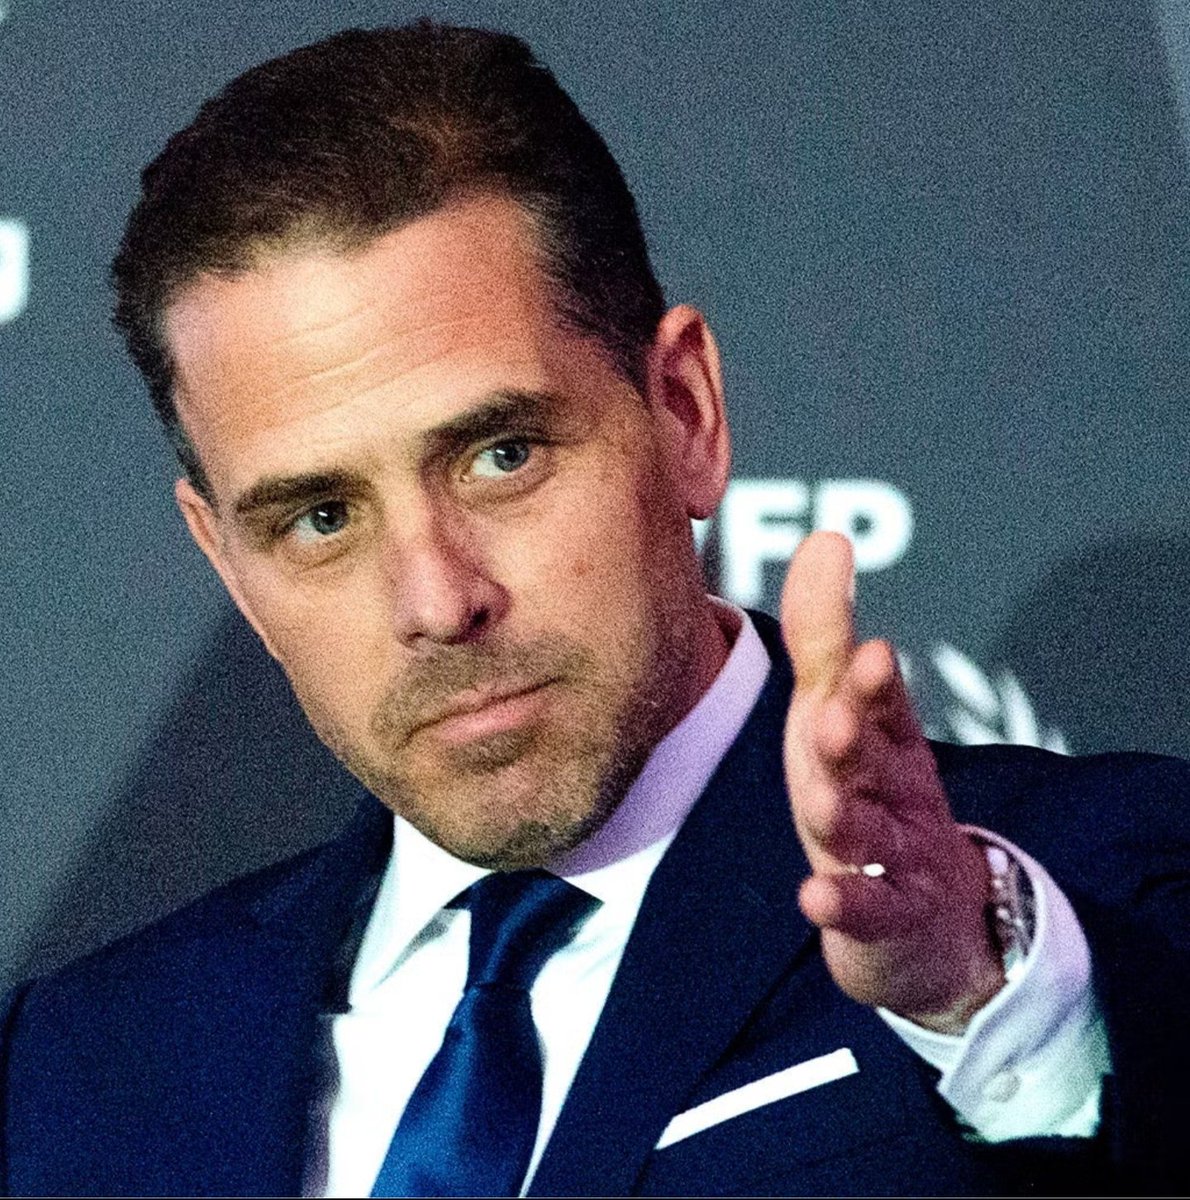 HOLY SHIT, Hunter Biden will be SUING Fox News for defamation! LOVE THIS!!! 🙏❤️